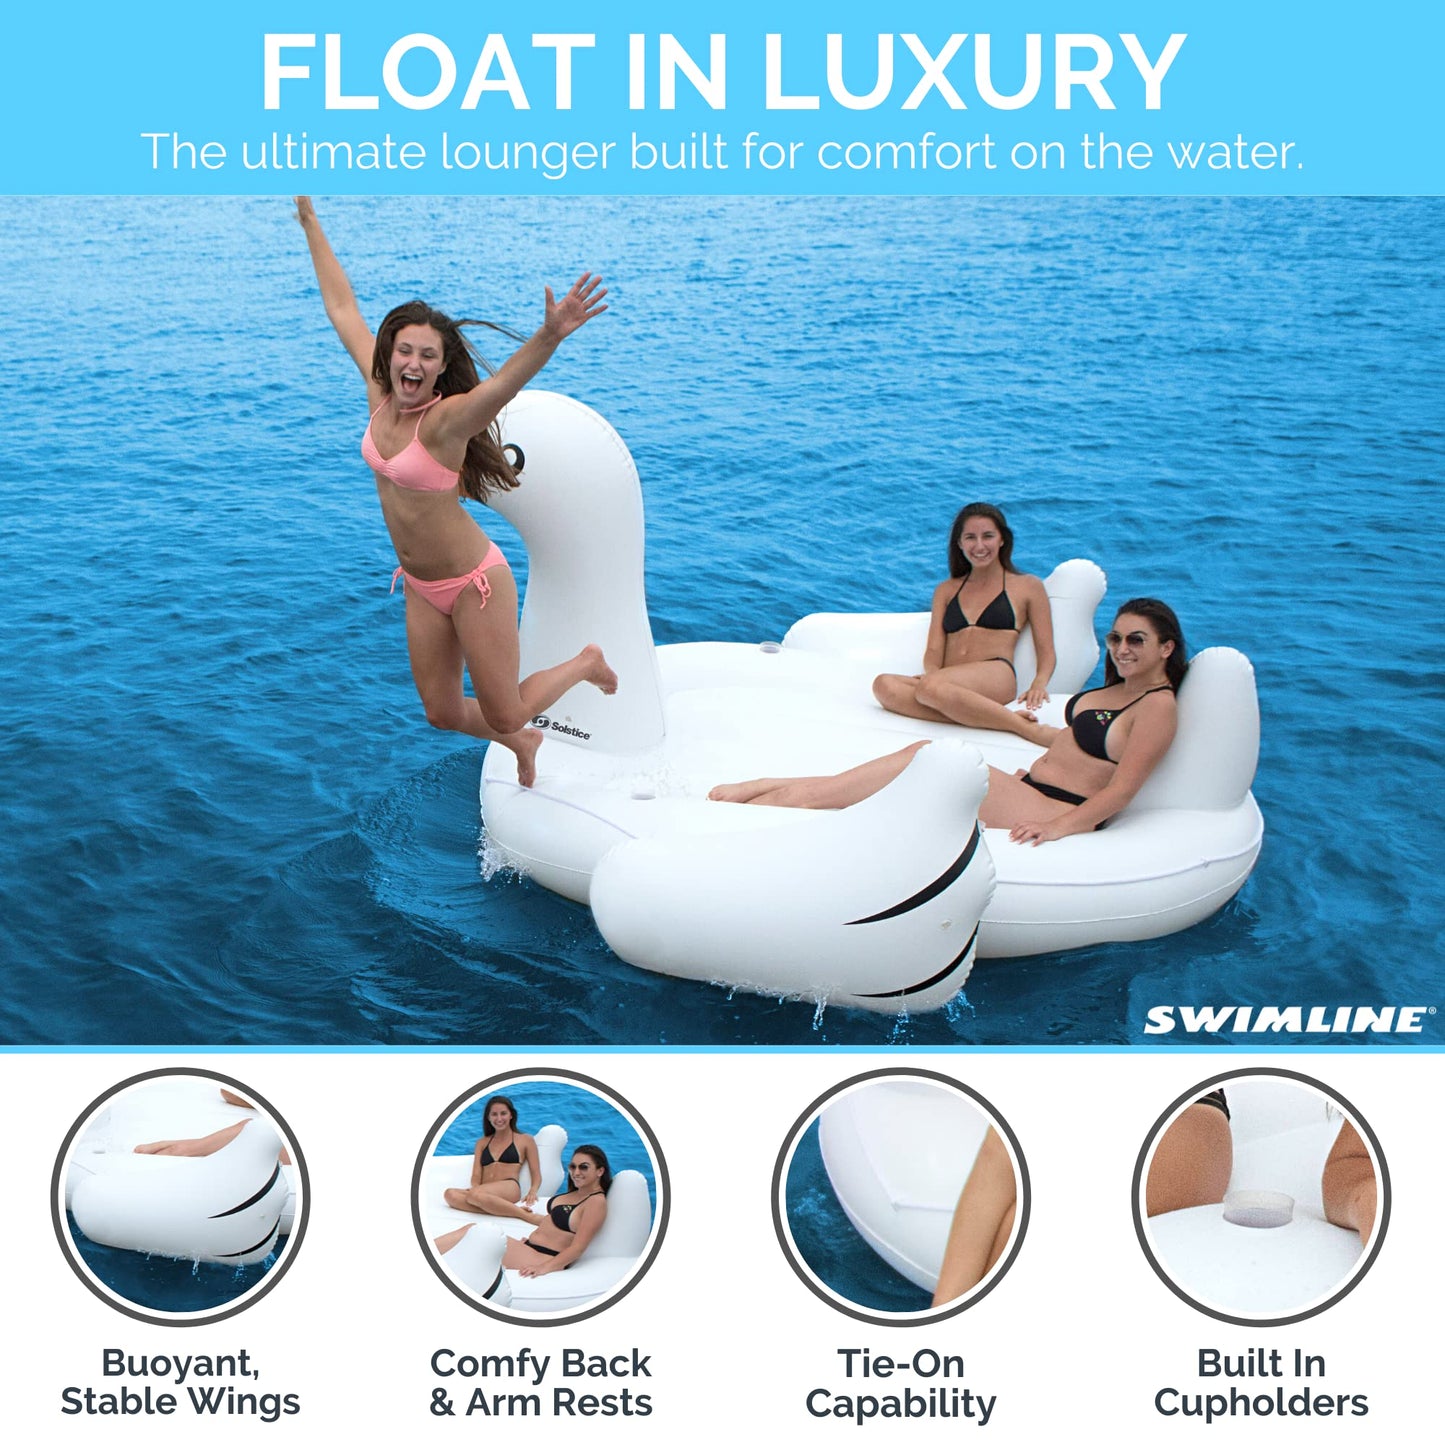 SWIMLINE Original Giant Ride On Inflatable Pool Float Lounge Series | Floaties W/Stable Legs Wings Large Rideable Blow Up Summer Beach Swimming Party Big Raft Tube Decoration Tan Toys for Kids Adults Swan XL